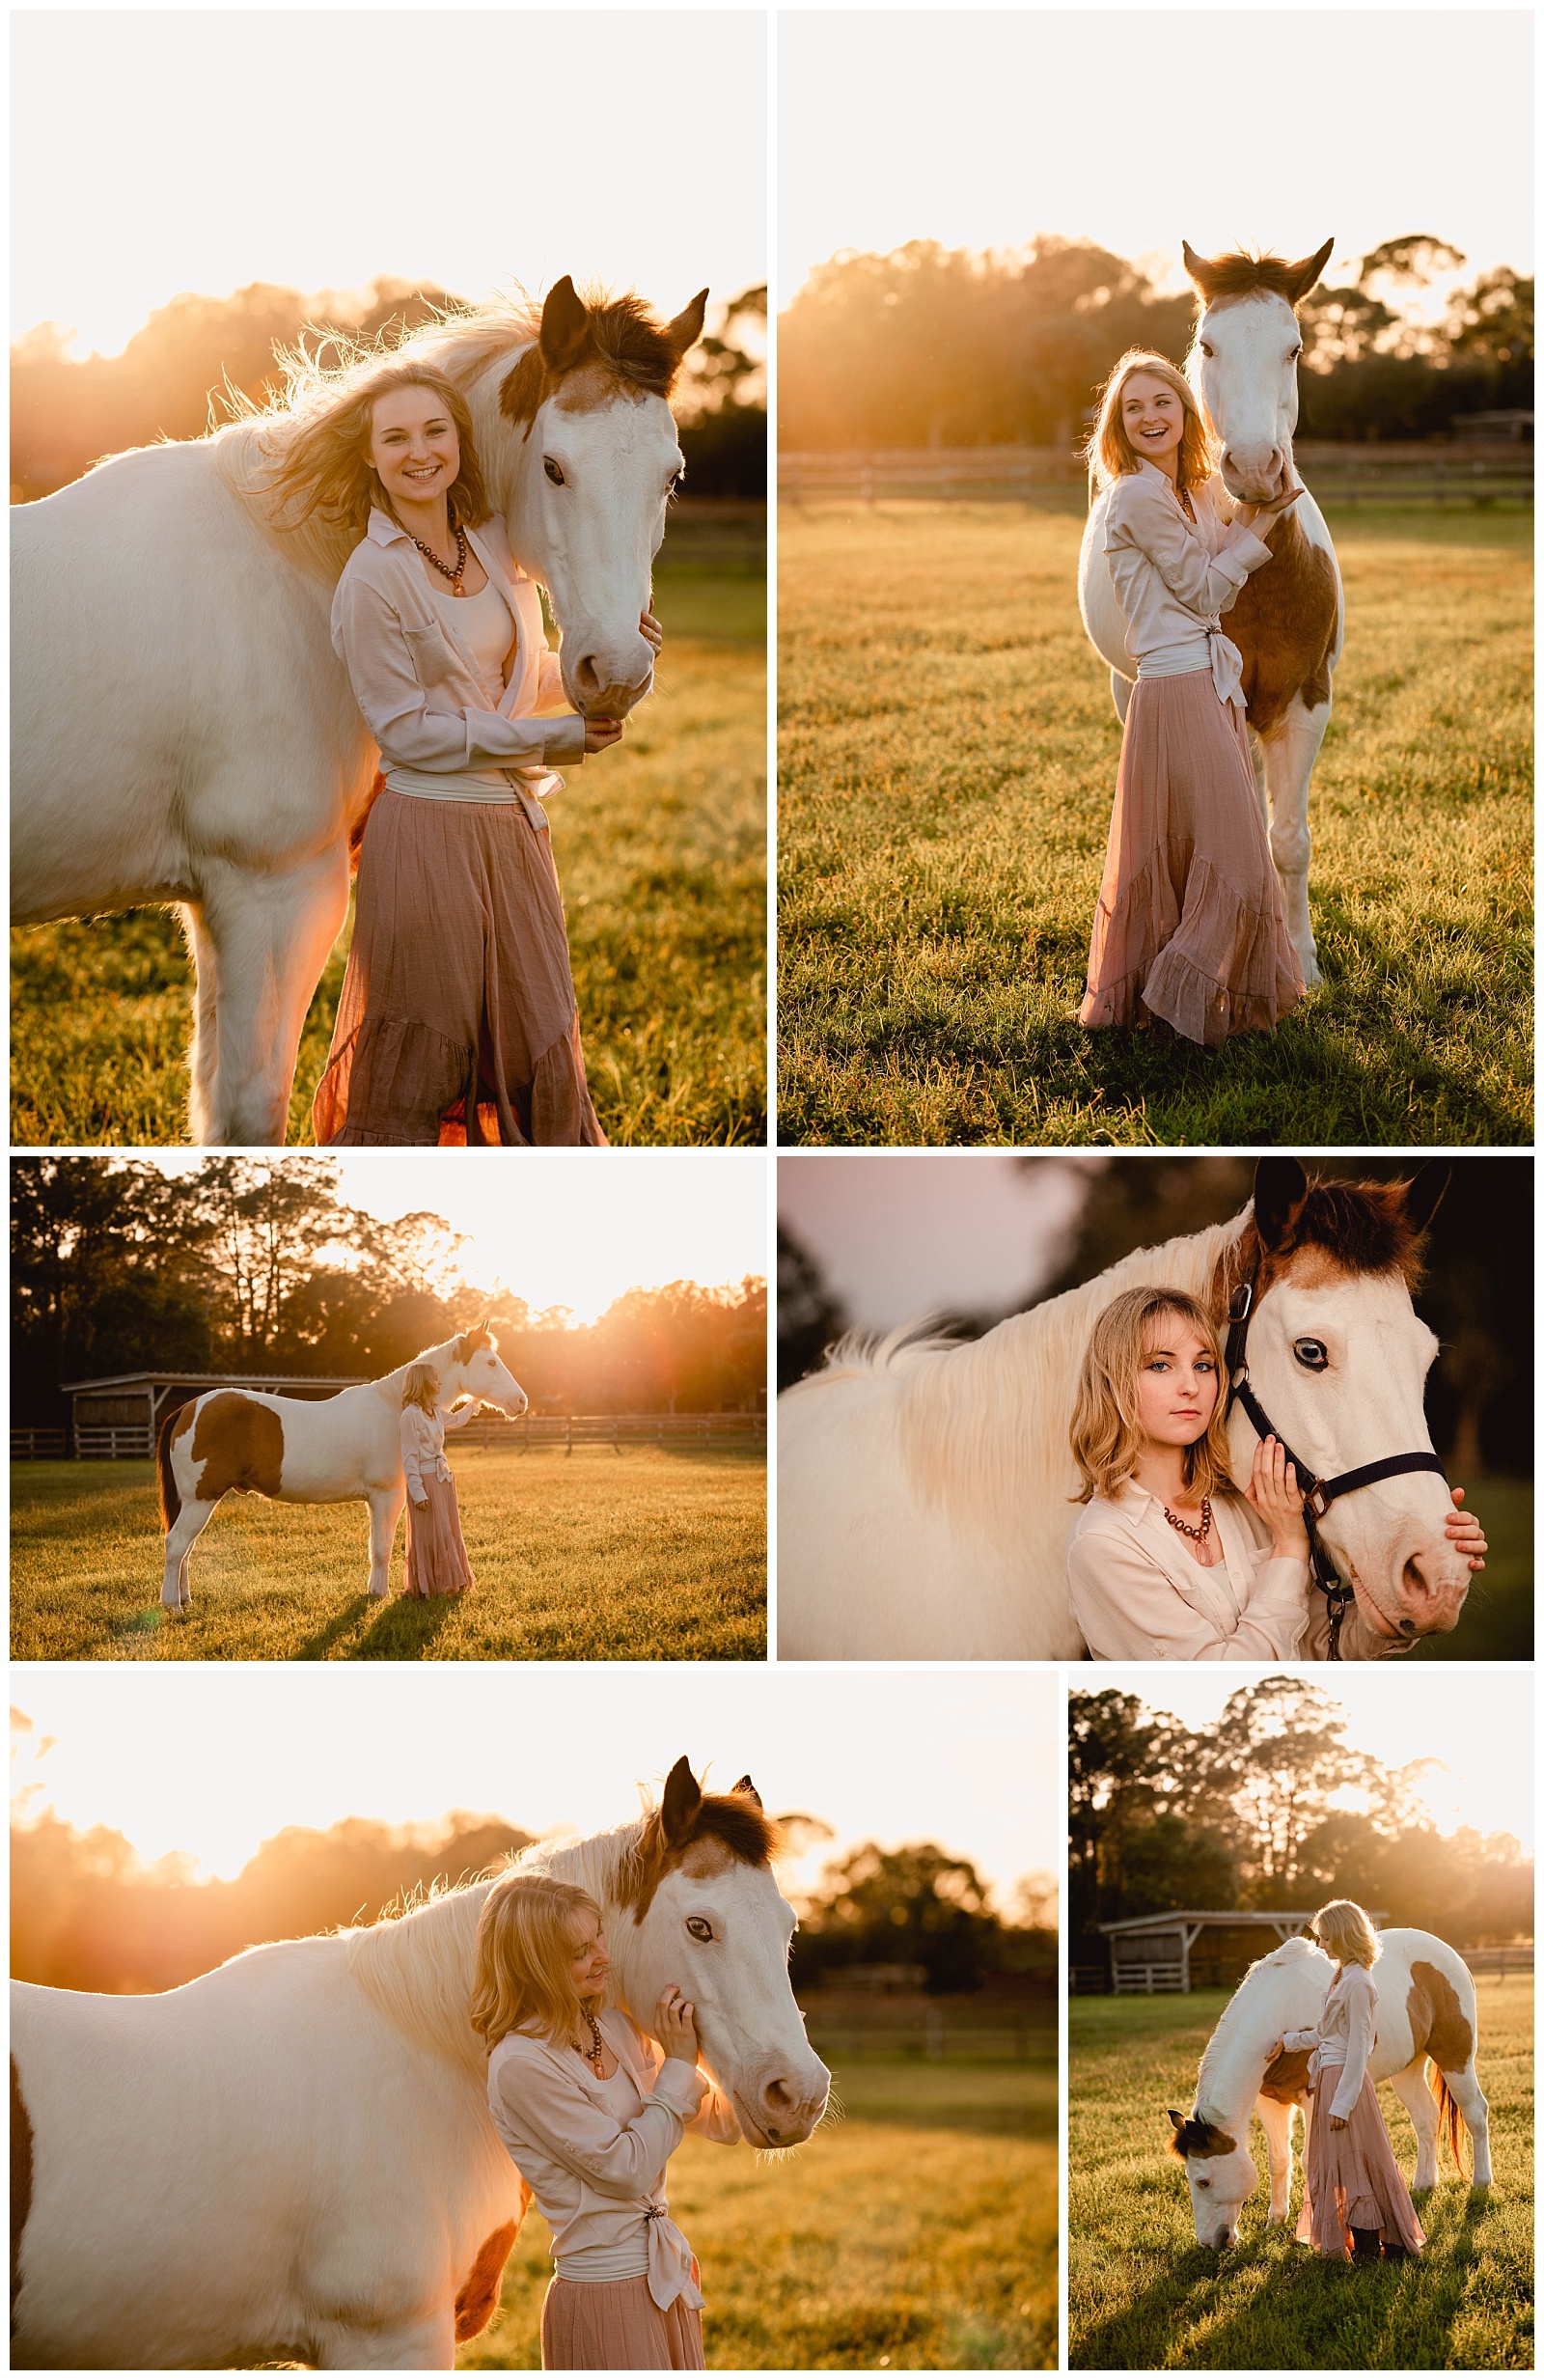 Golden hour photoshoot in Fort Myers, Florida with girl and her paint horse.